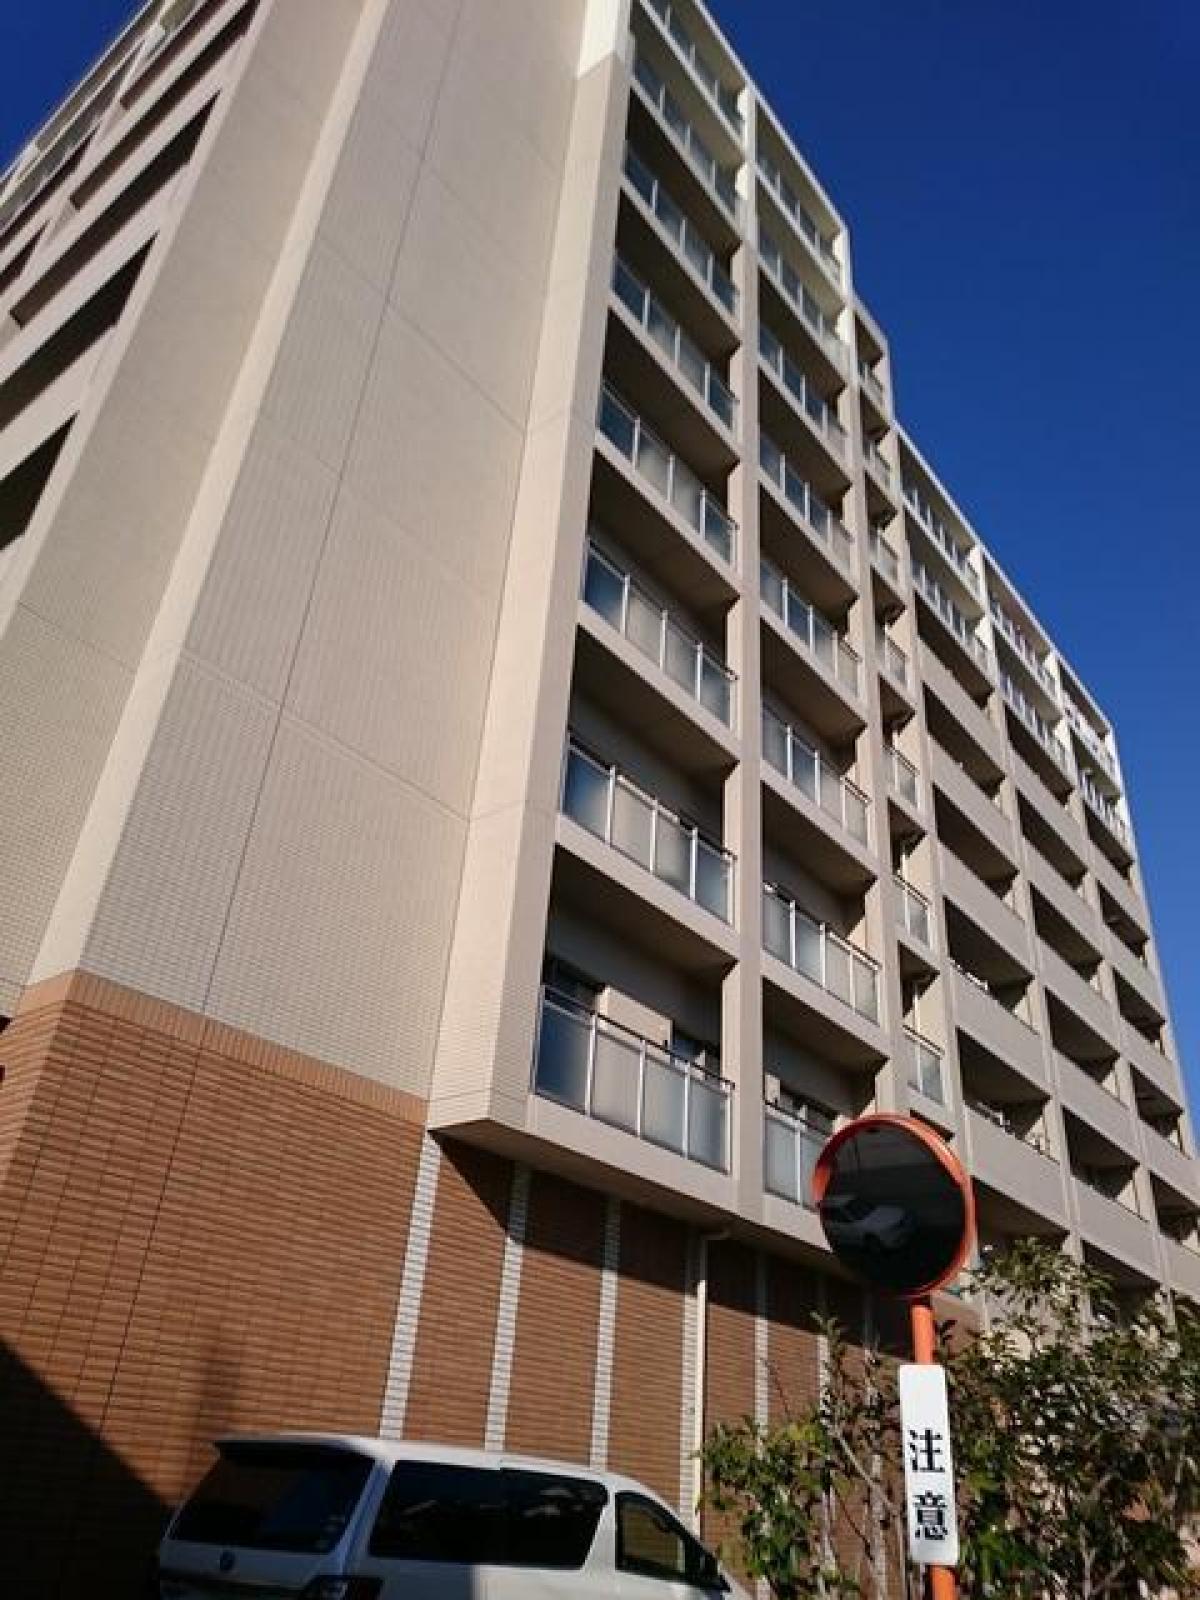 Picture of Apartment For Sale in Yao Shi, Osaka, Japan